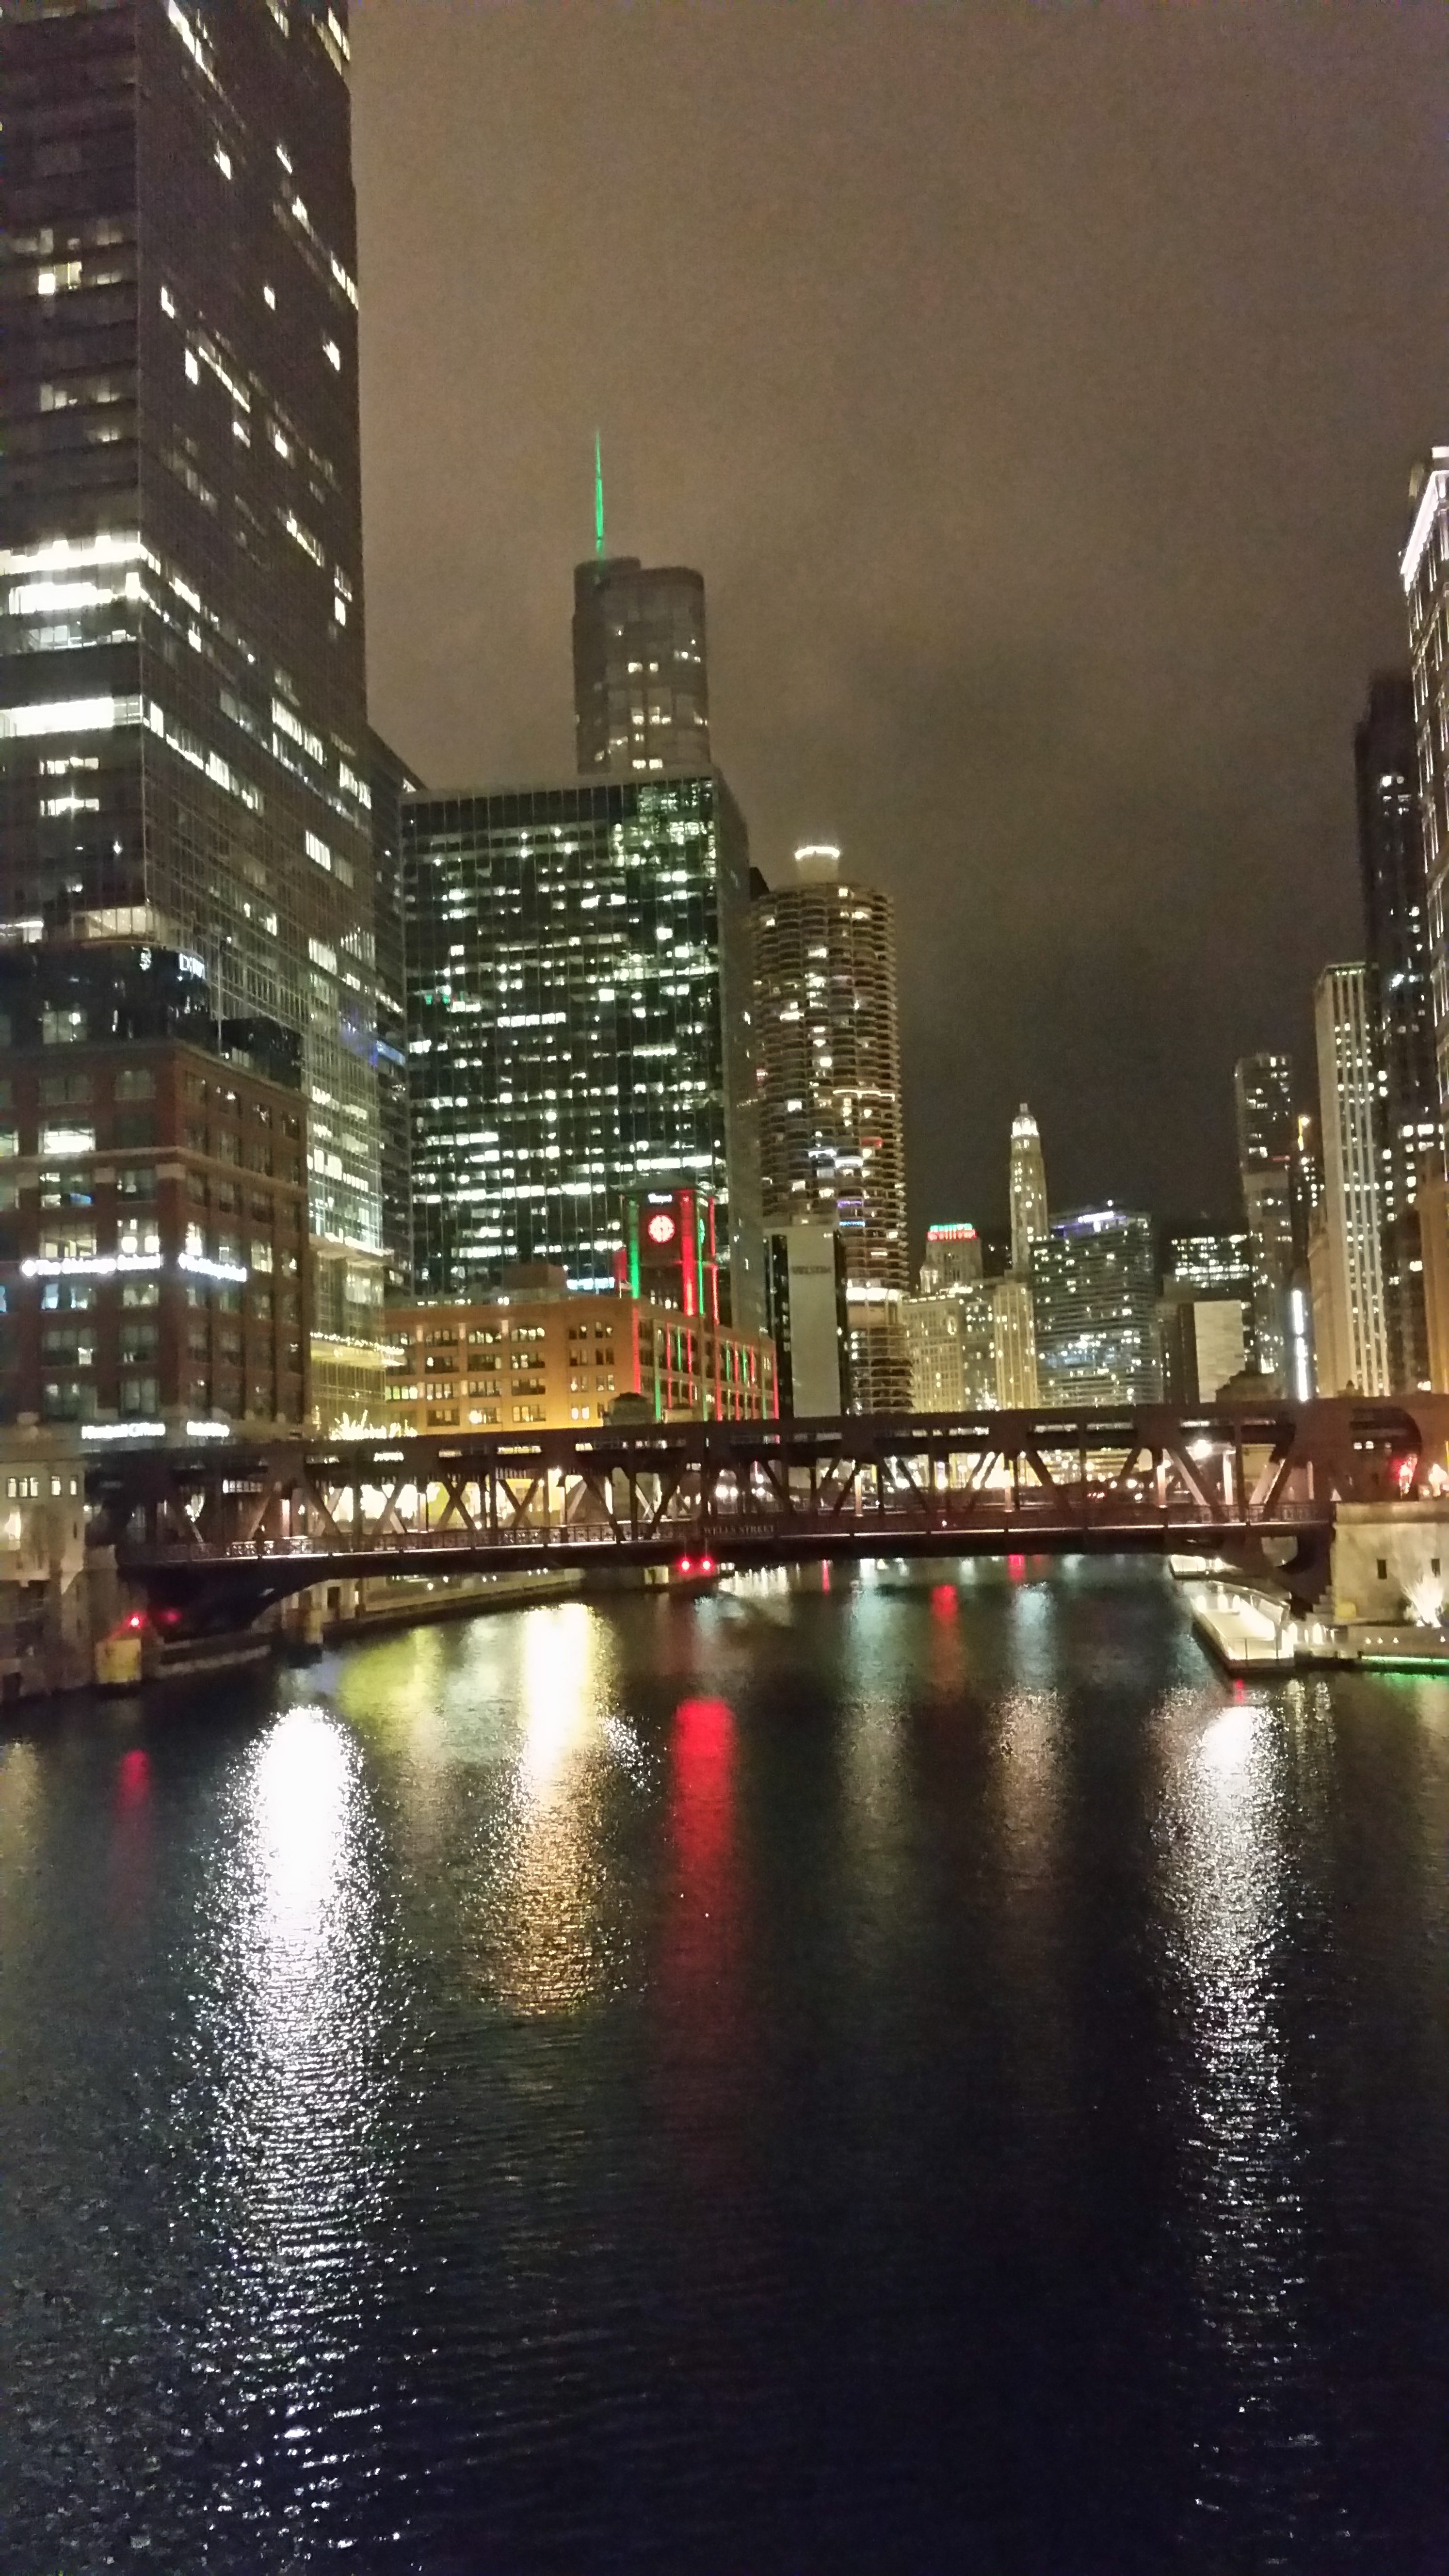 Chicago, City of Lights | 95.9 The River